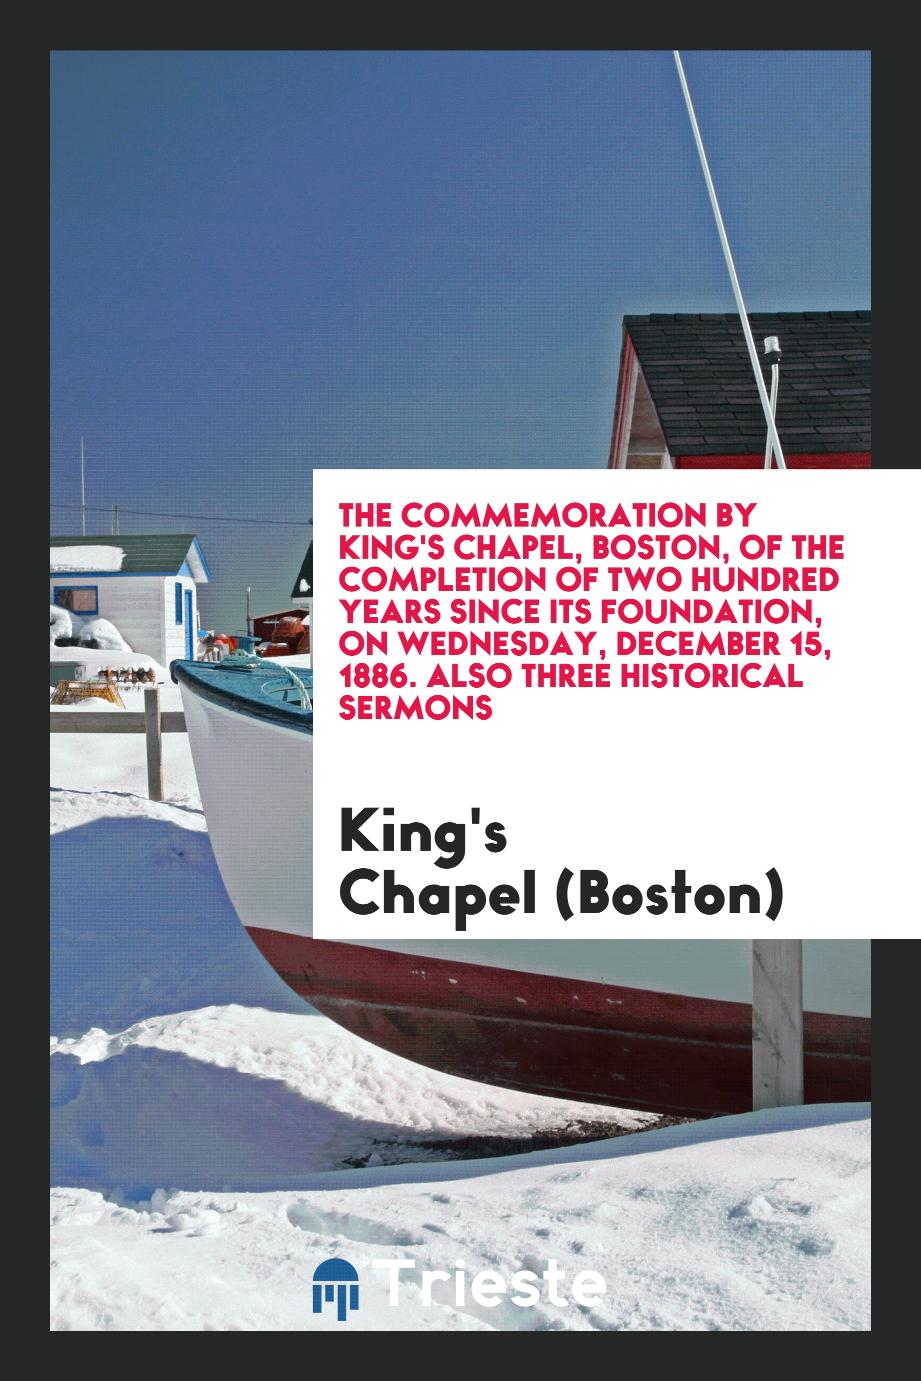 The Commemoration by King's Chapel, Boston, of the Completion of Two Hundred Years Since Its Foundation, on Wednesday, December 15, 1886. Also Three Historical Sermons